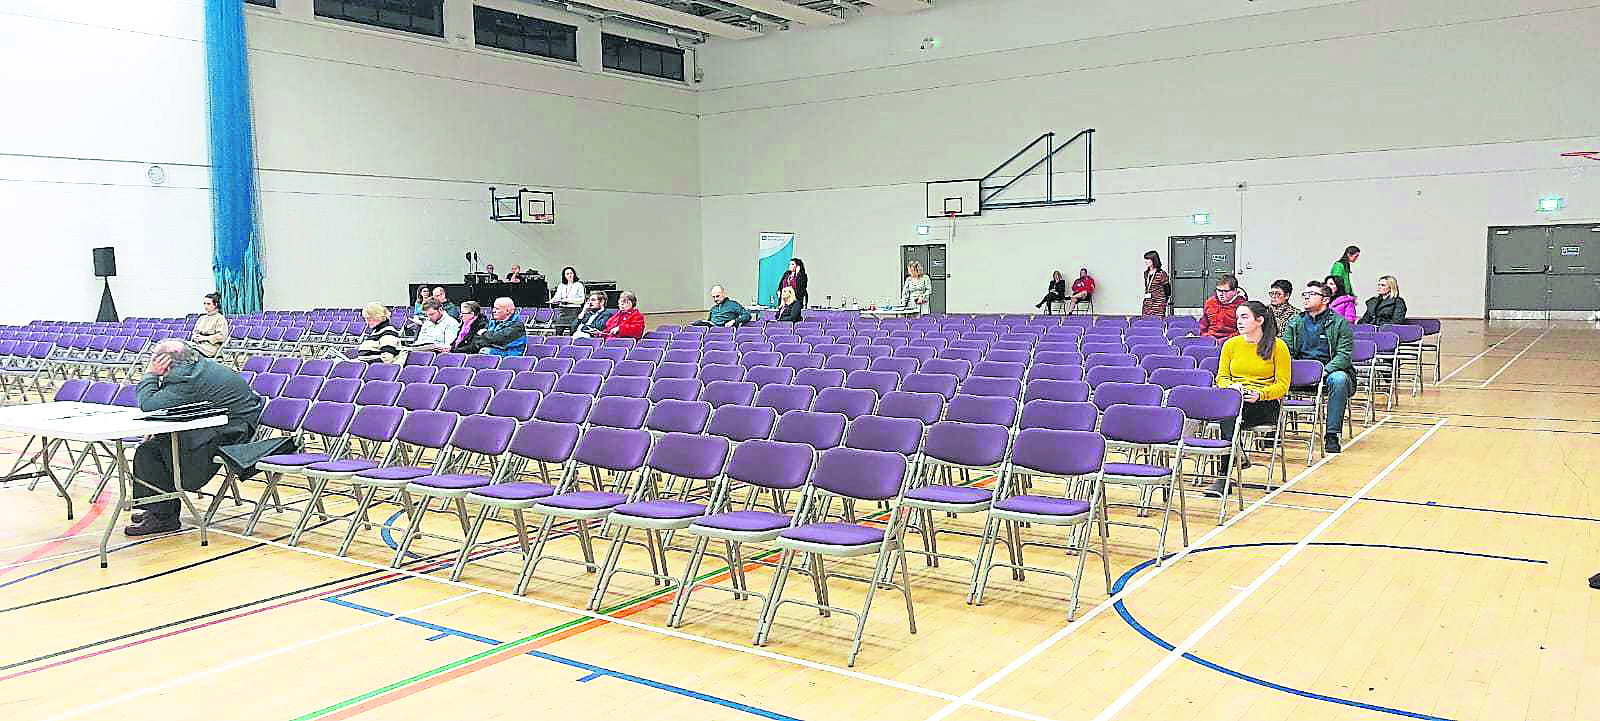 Tyrone consultation event on future of SWAH services attracts sparse crowd